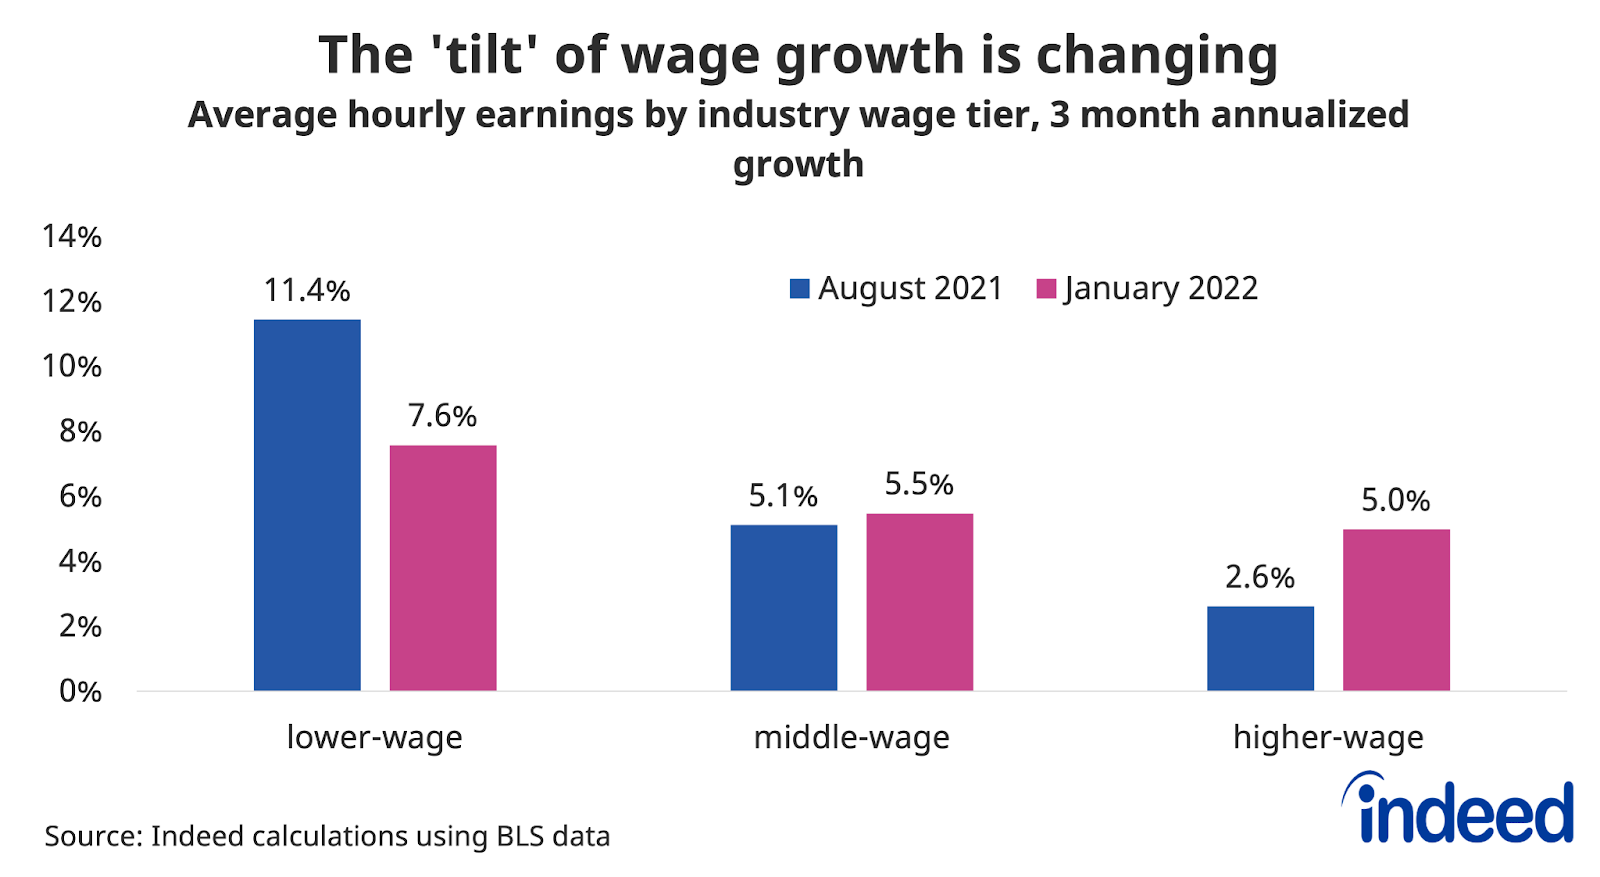 Bar graph titled “The ‘tilt’ of wage growth is changing”